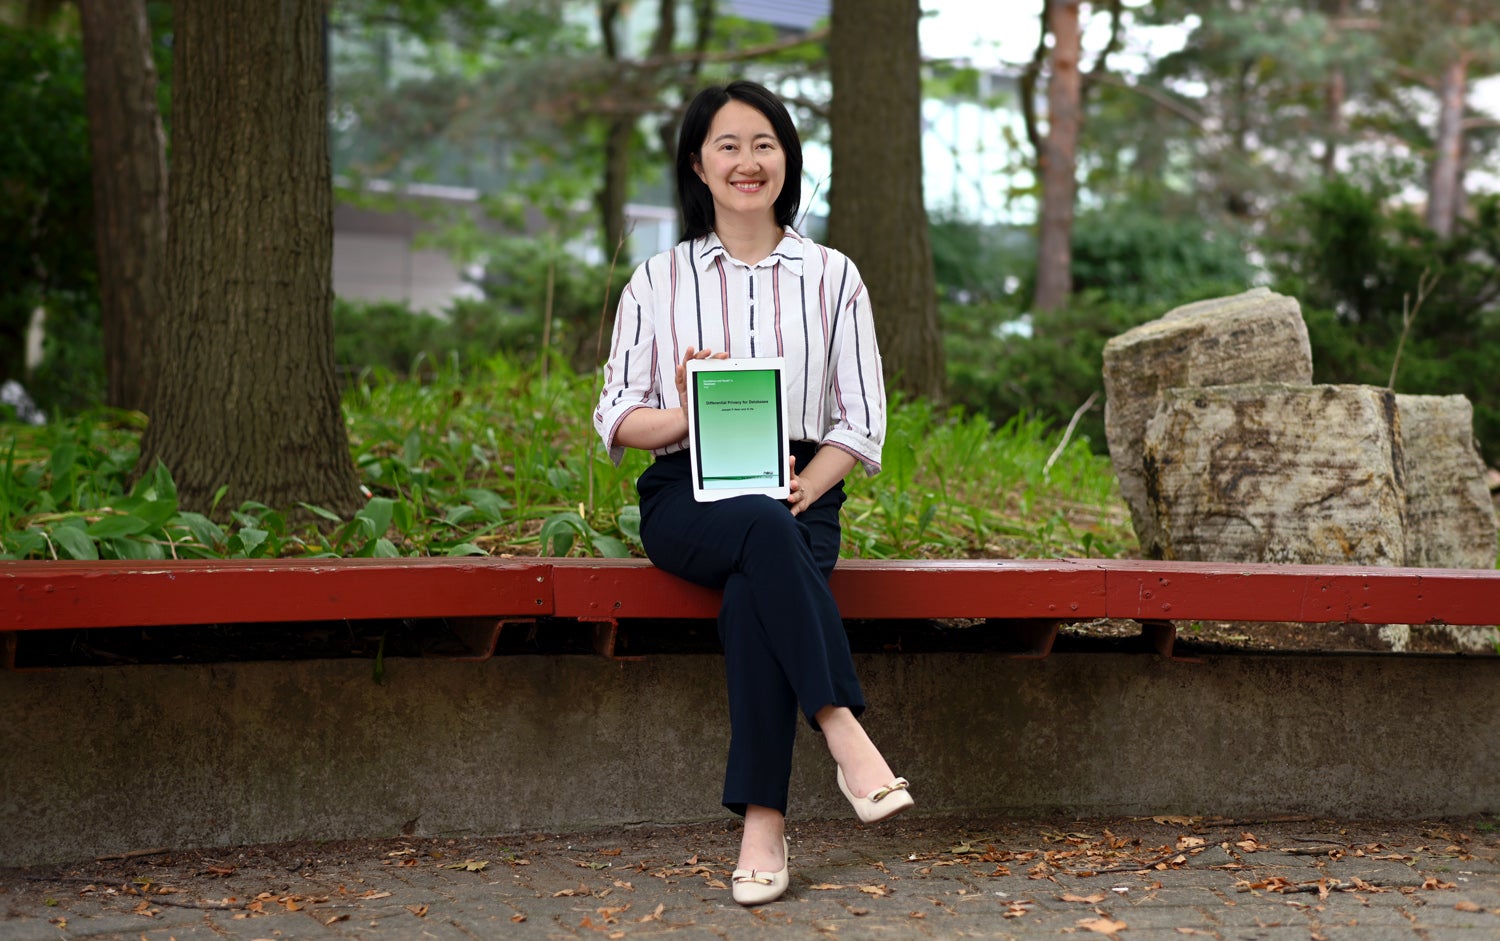 Professor Xi He with her book, Differential Privacy for Databases